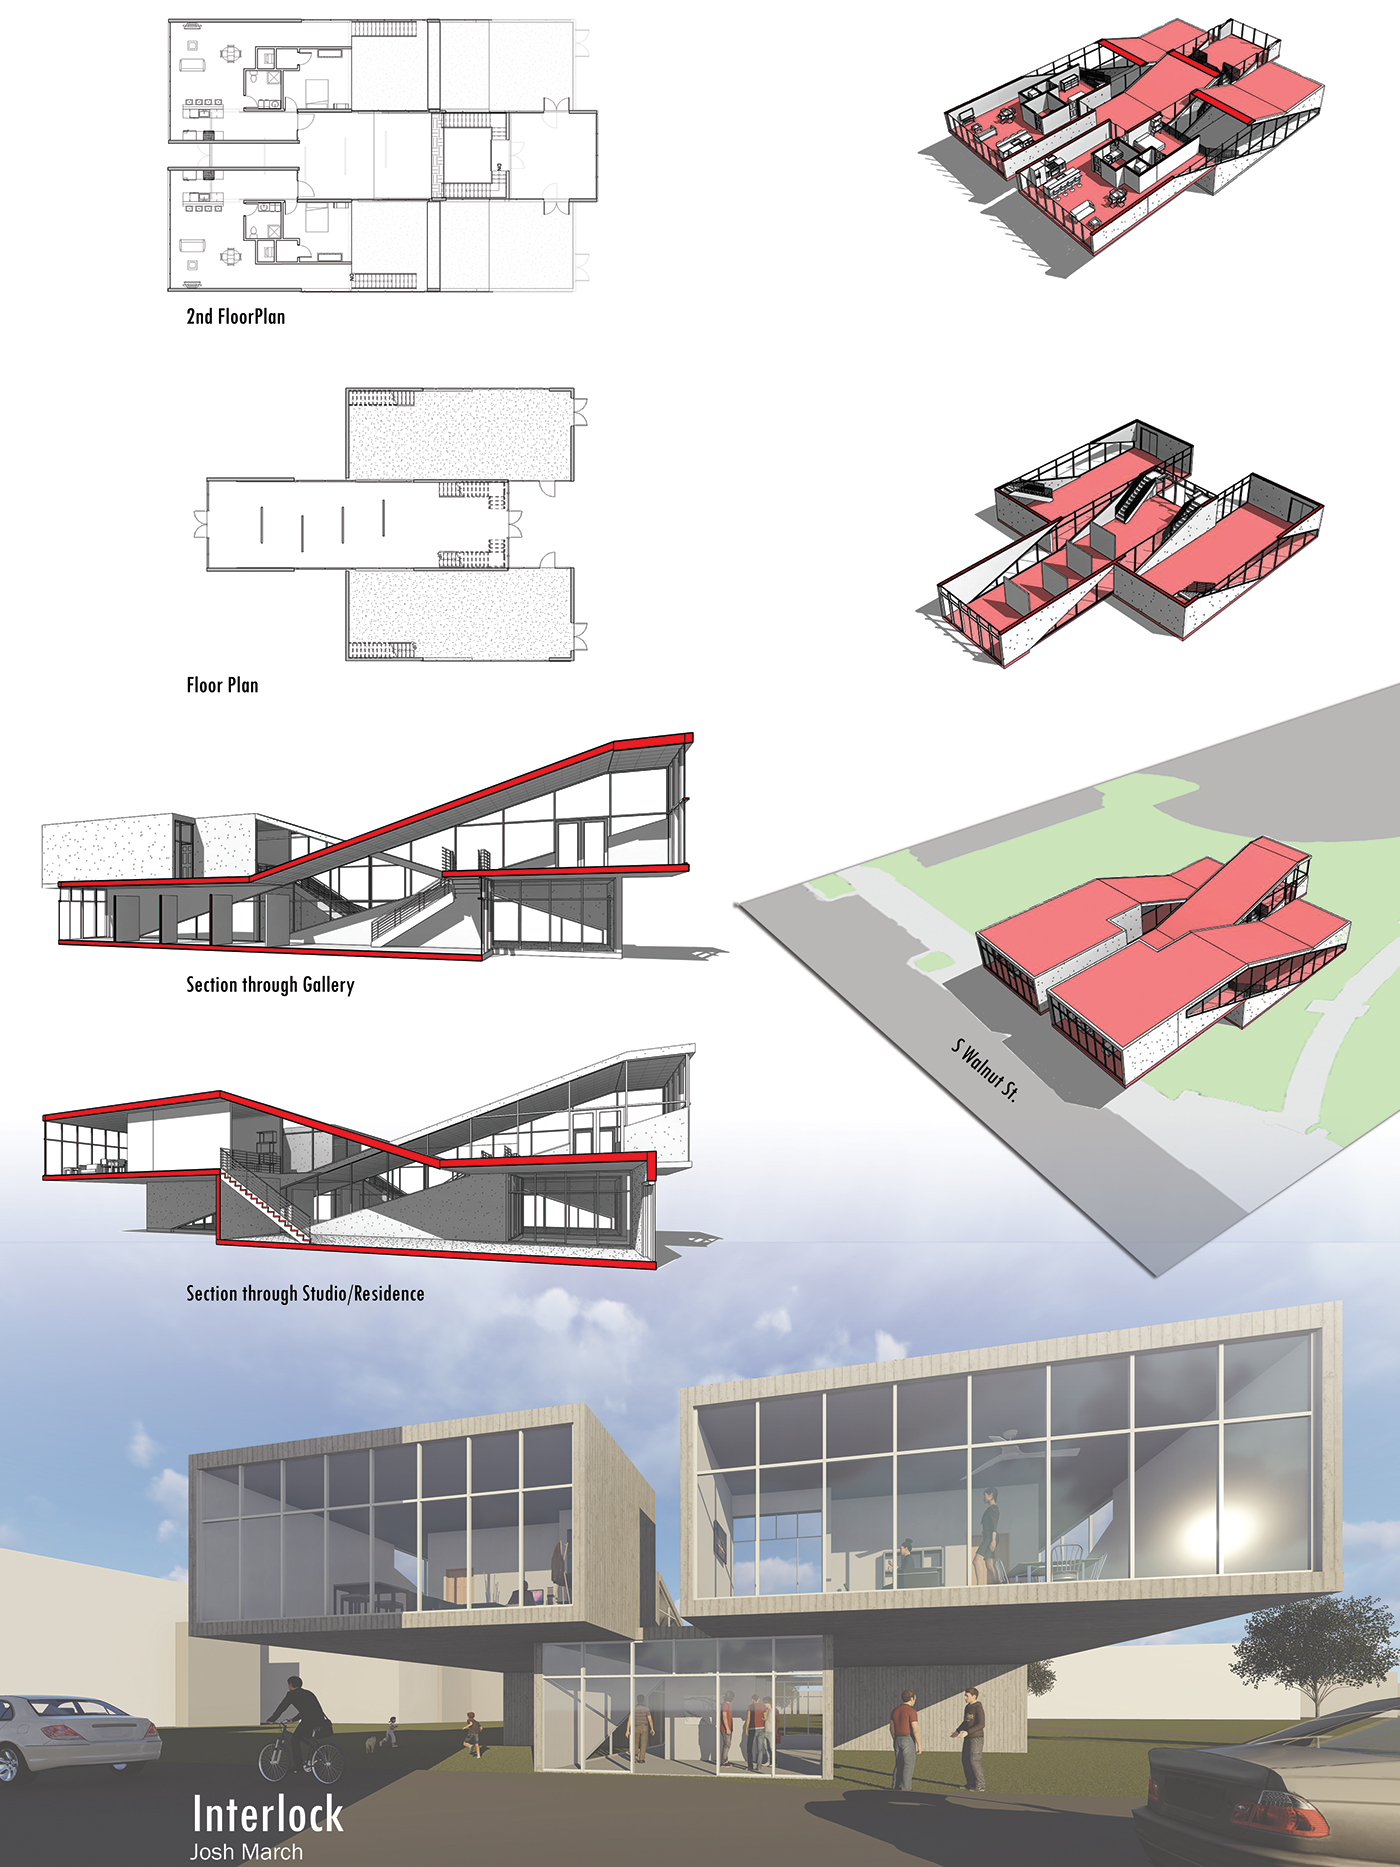 artist-in-residence architecture Muncie Ball State University Natural Light Green Roof revit lumion photoshop conceptual design